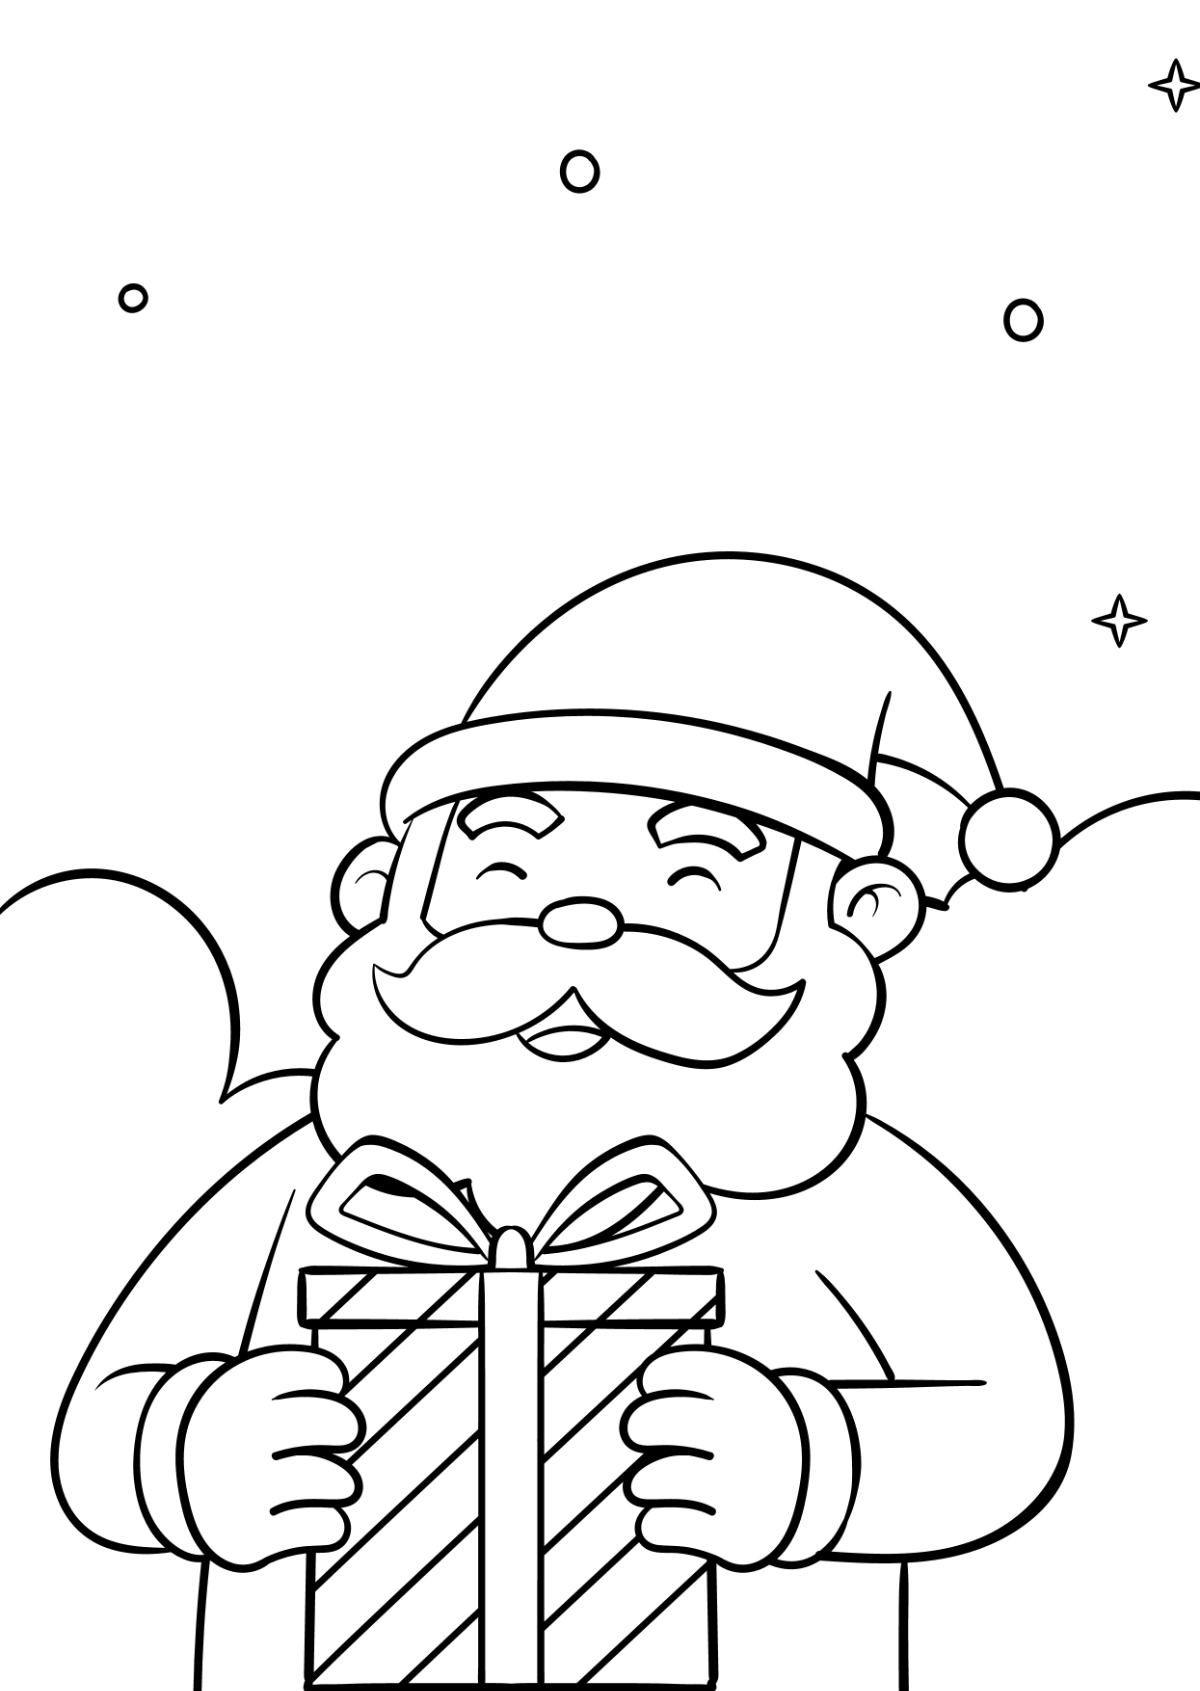 Christmas Drawing Very Easy For Beginners /Christmas painting / Santa Claus  Drawing - YouTube